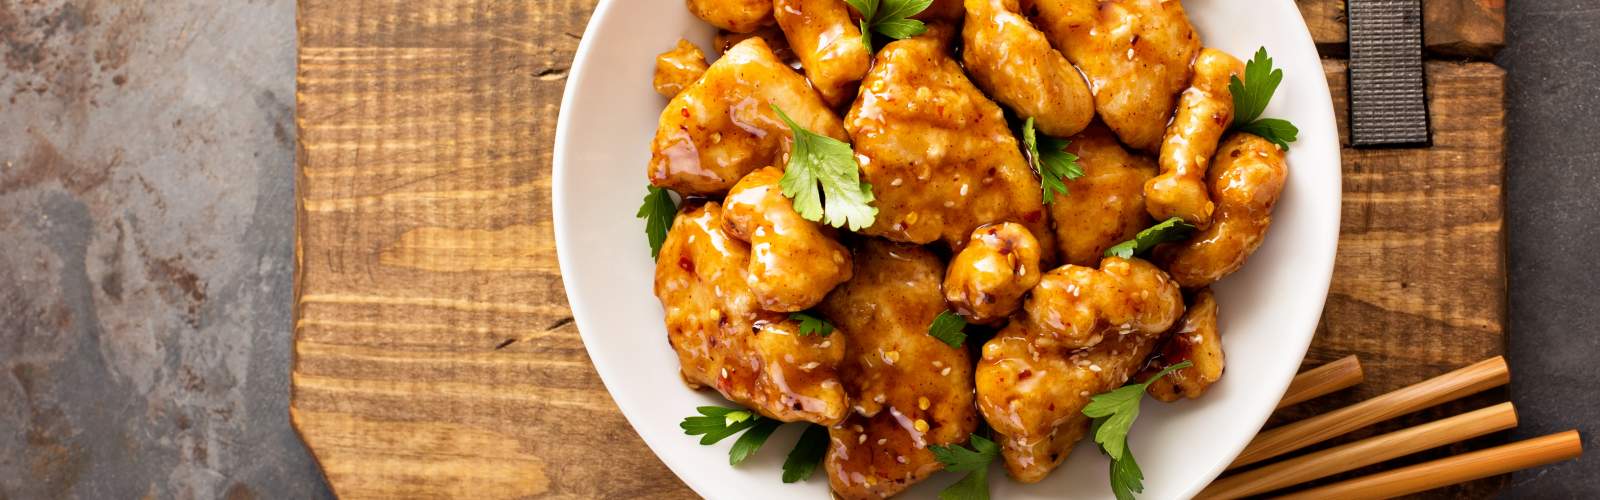 Keto Sweet and Sour Sesame Chicken